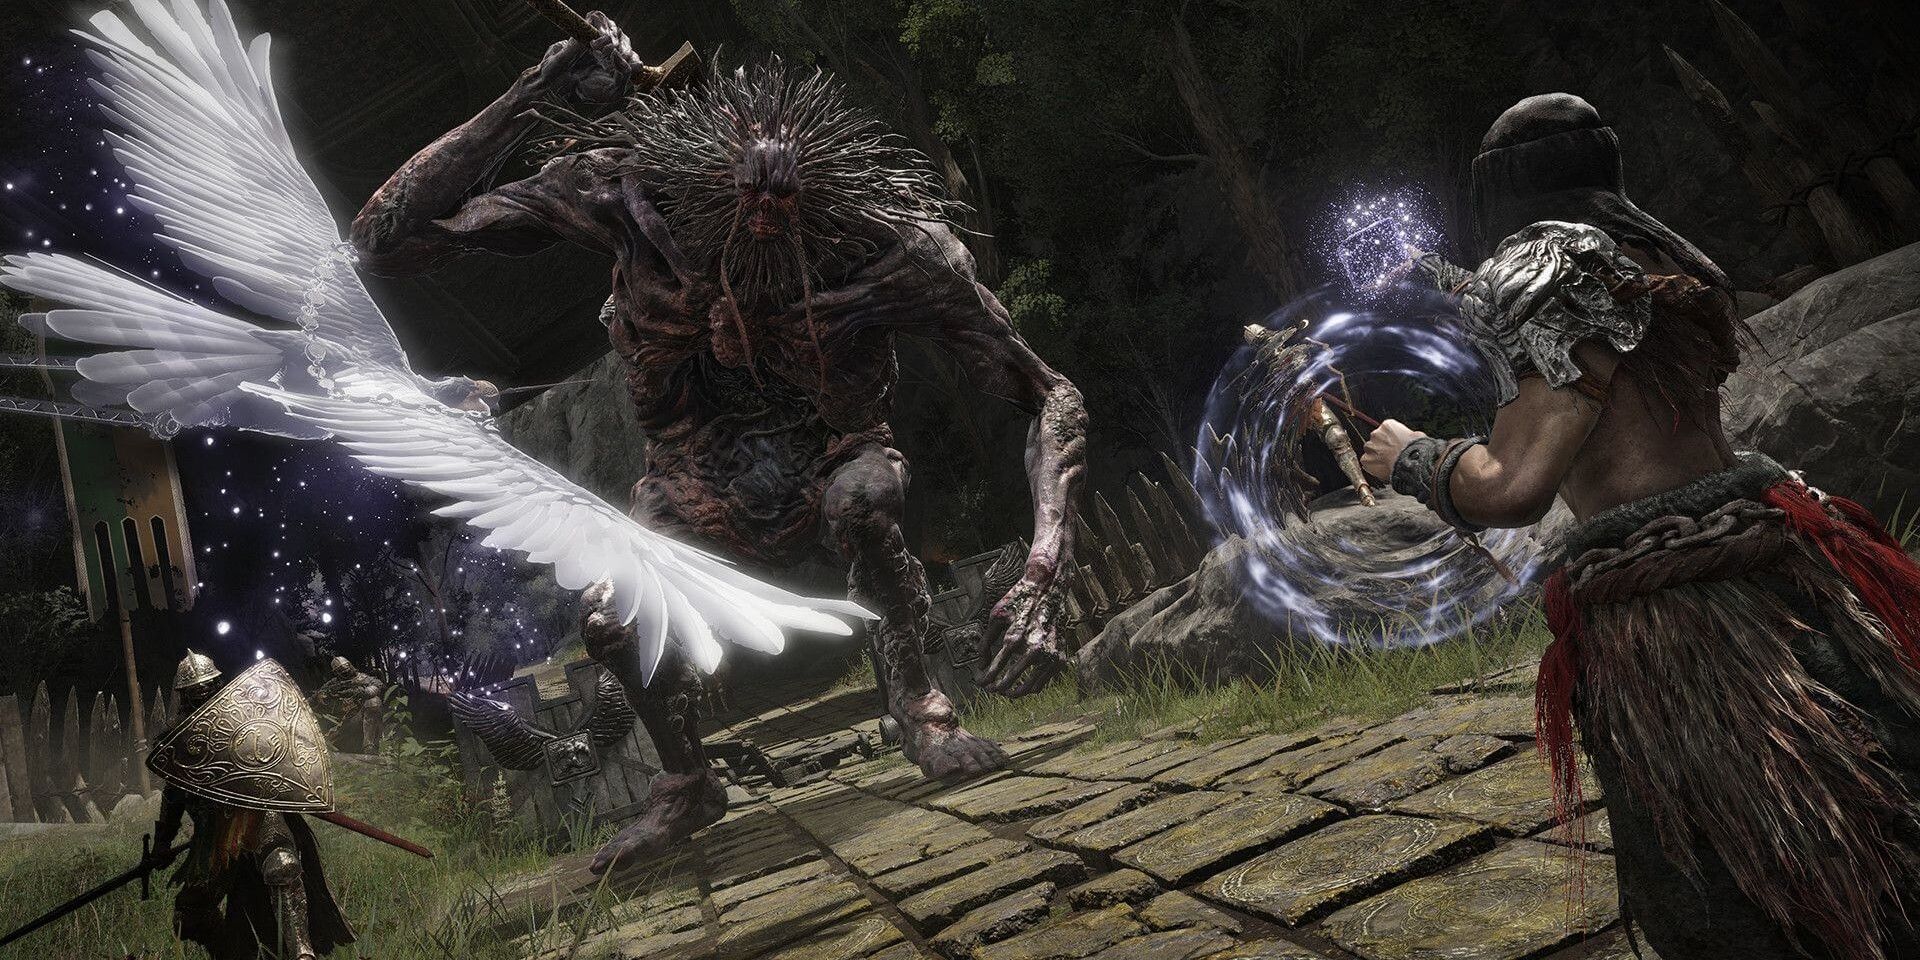 Elden Ring screenshot of the main character spellcasting against a giant